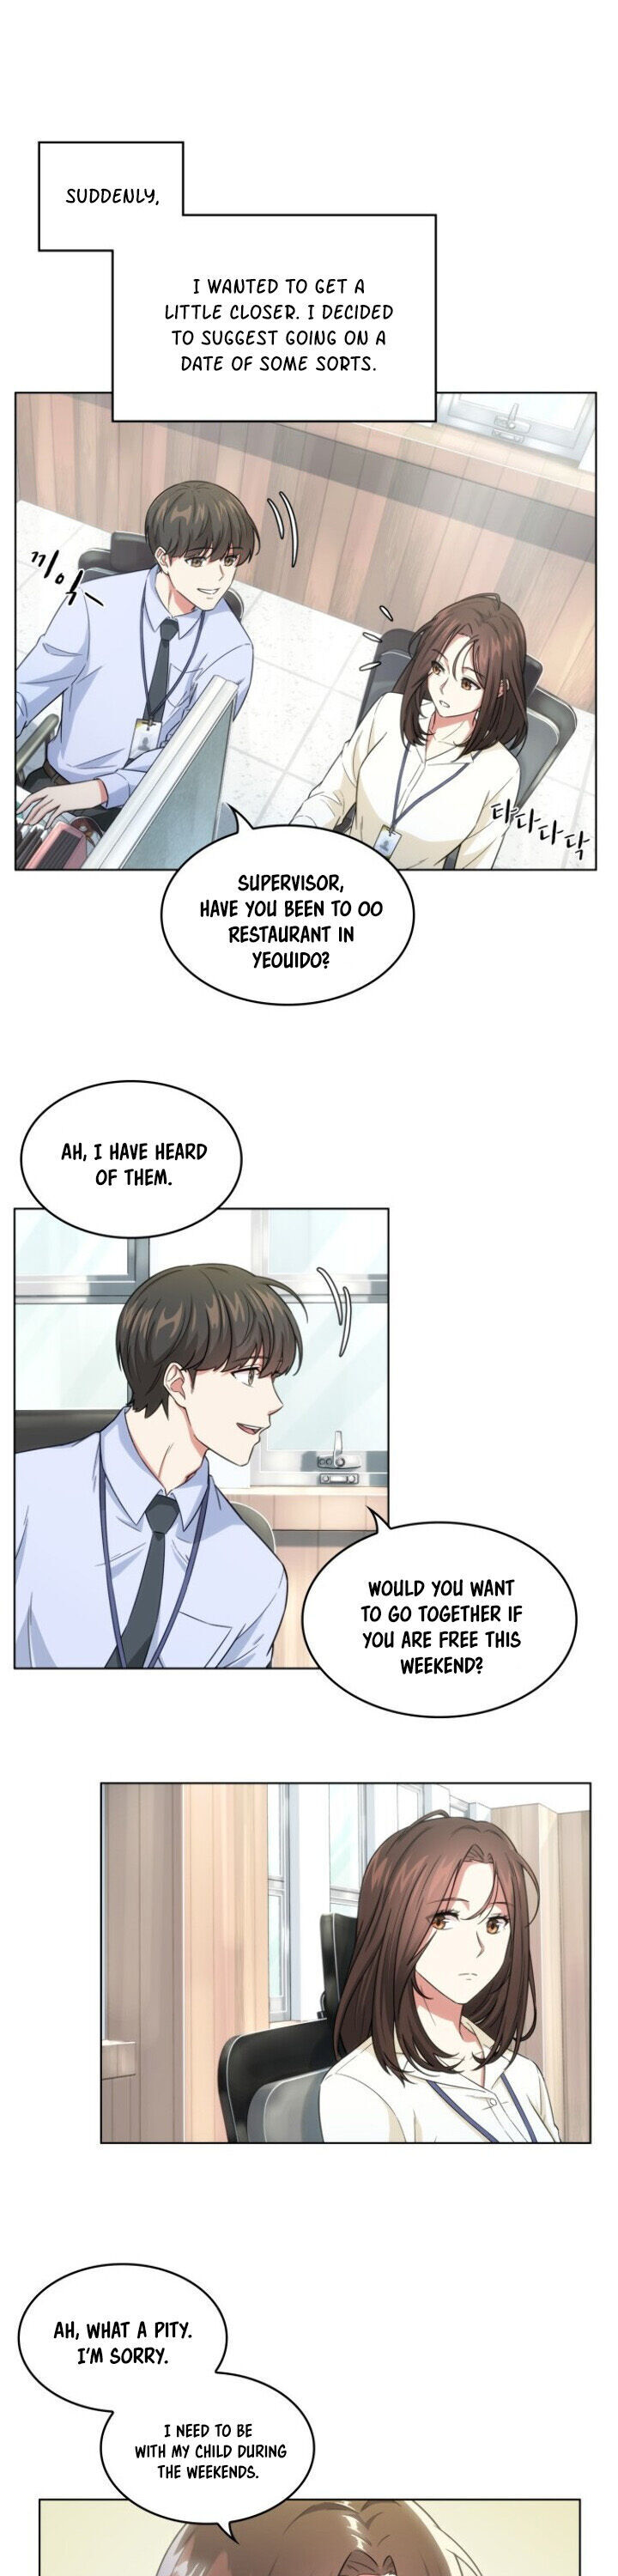 My Office Noona’s Story - Chapter 10 Page 5